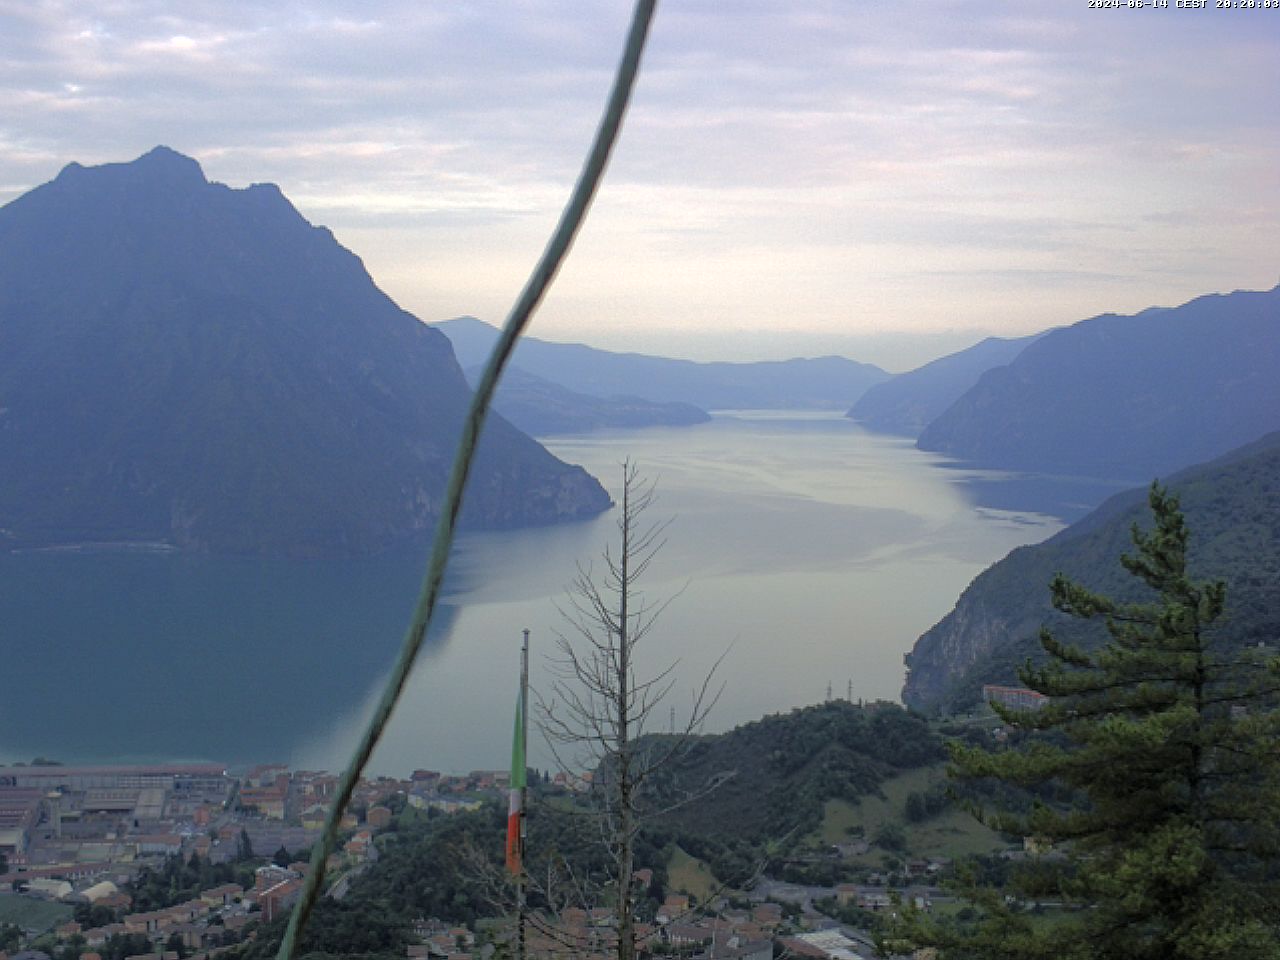 Lovere (Lac d'Iseo) Ma. 20:29